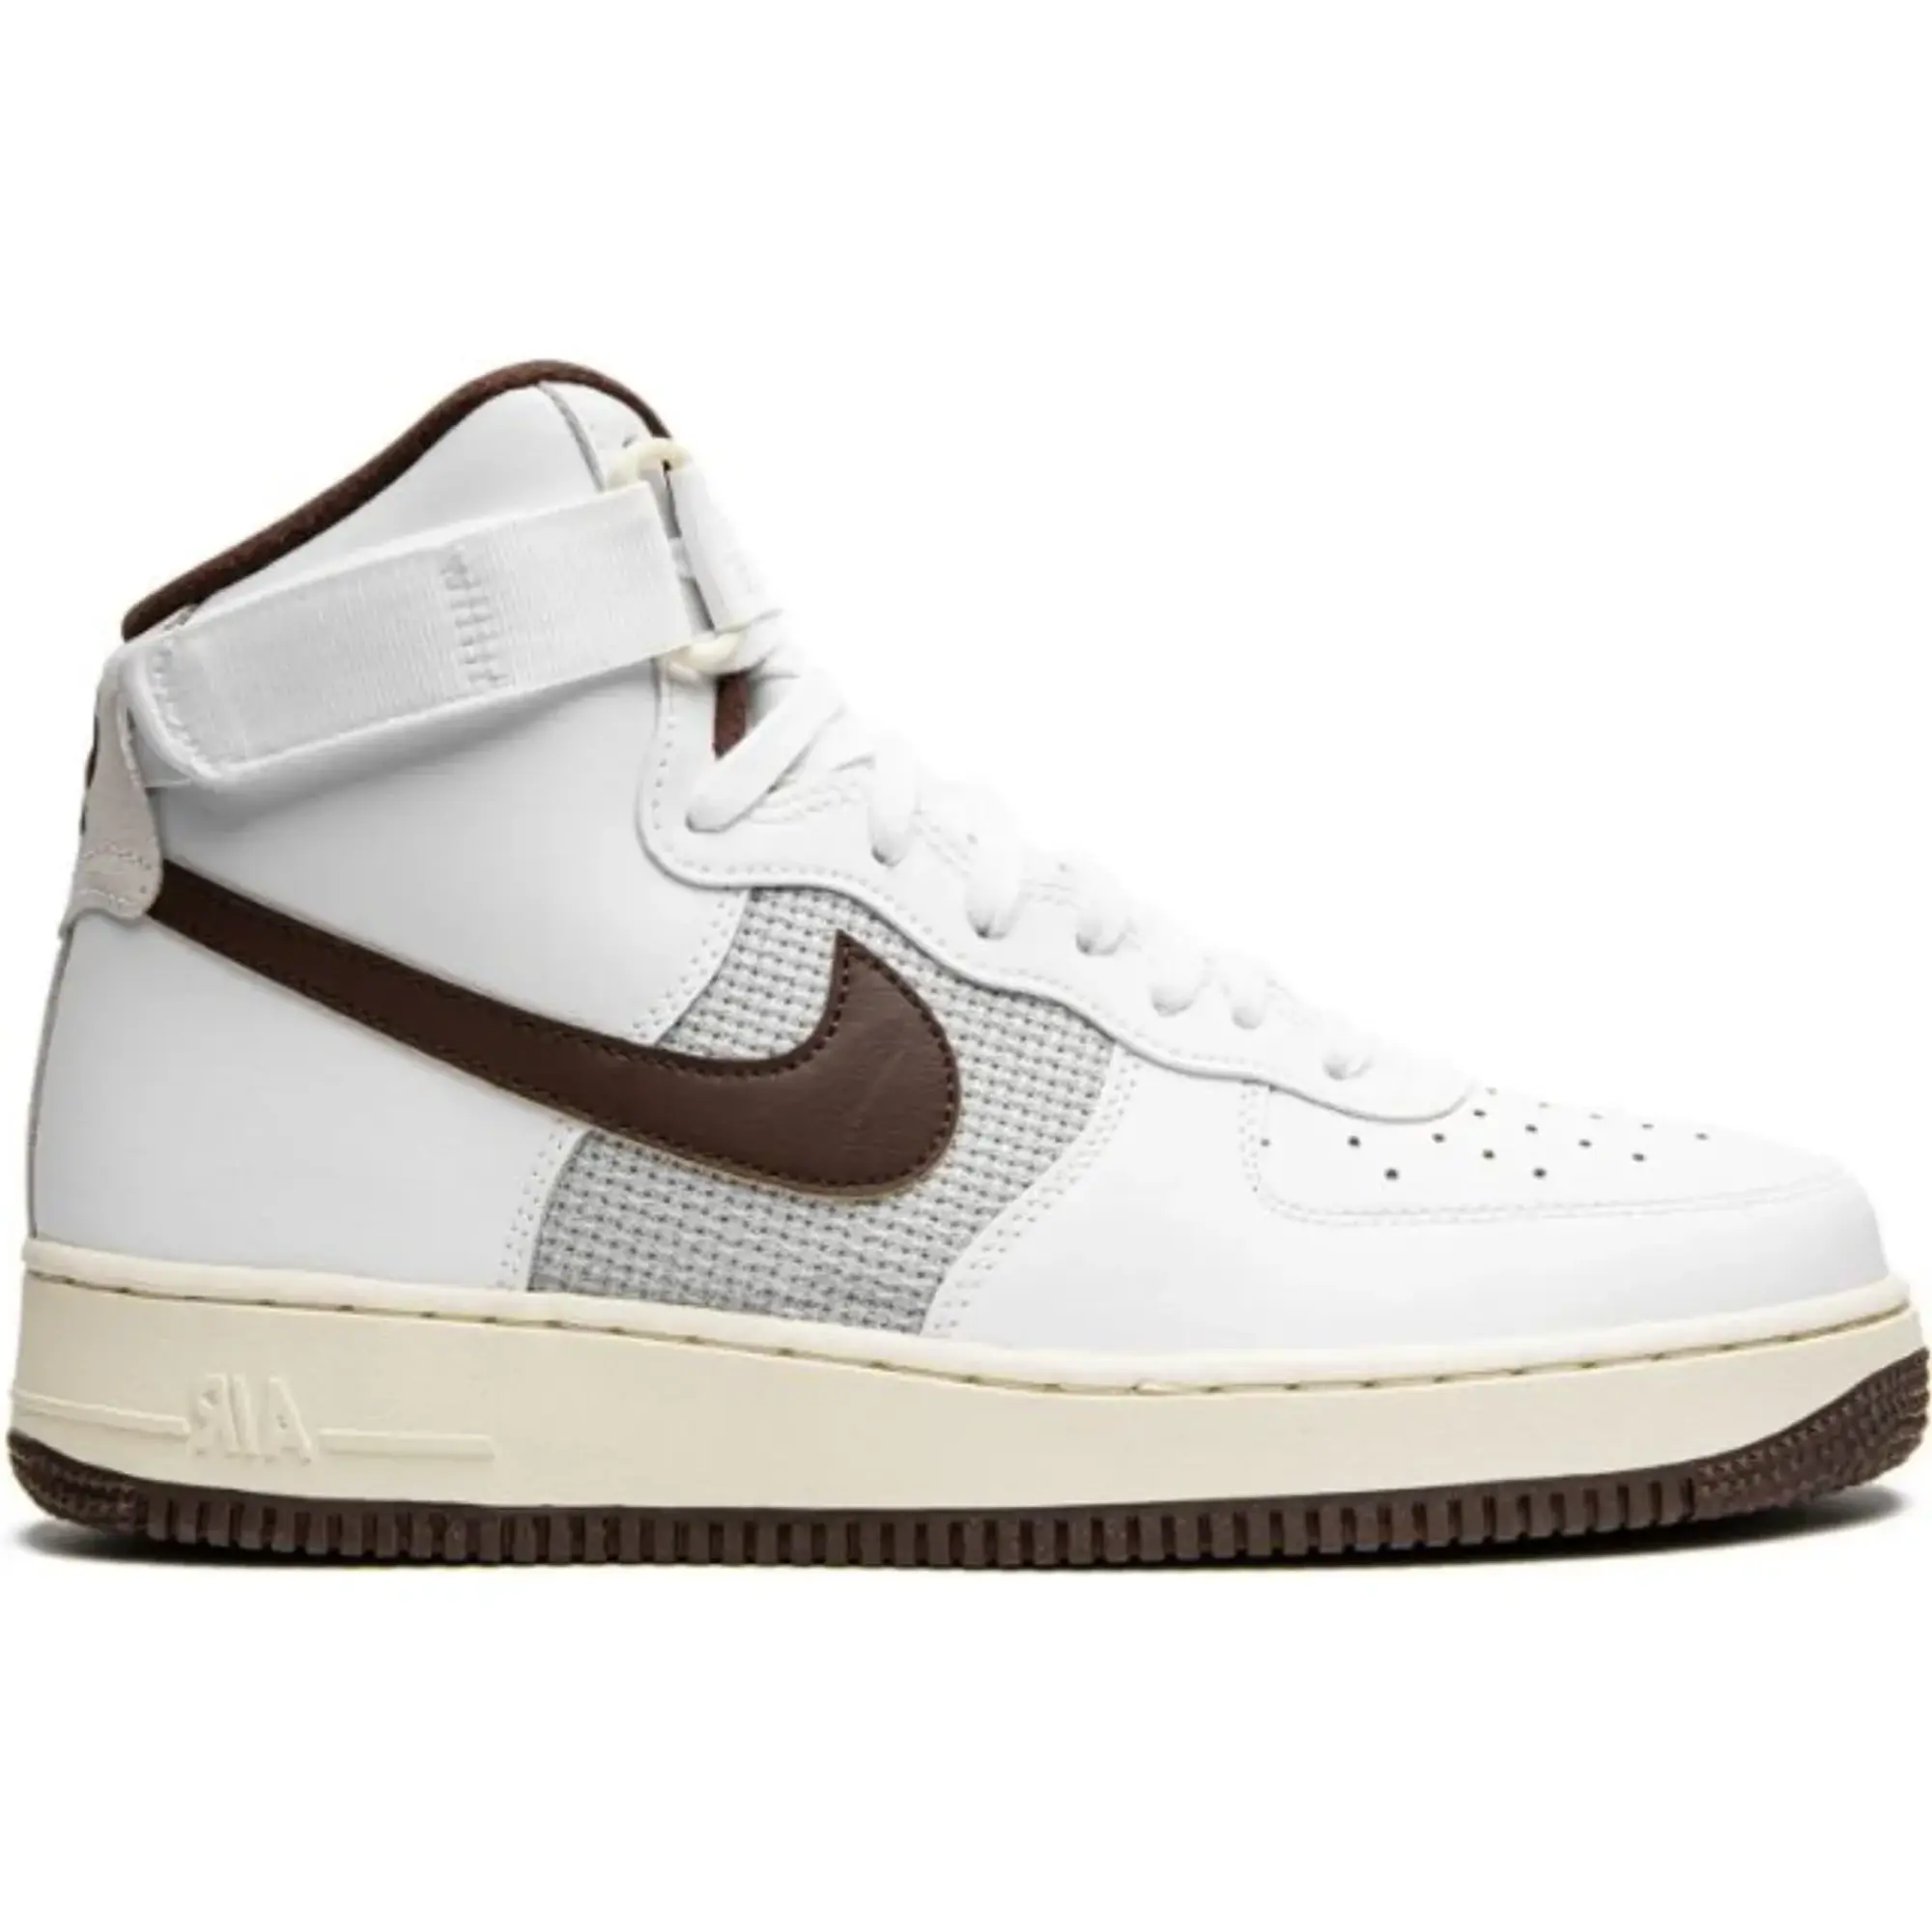 Nike Air Force 1 High '07 White Light Chocolate Shoes